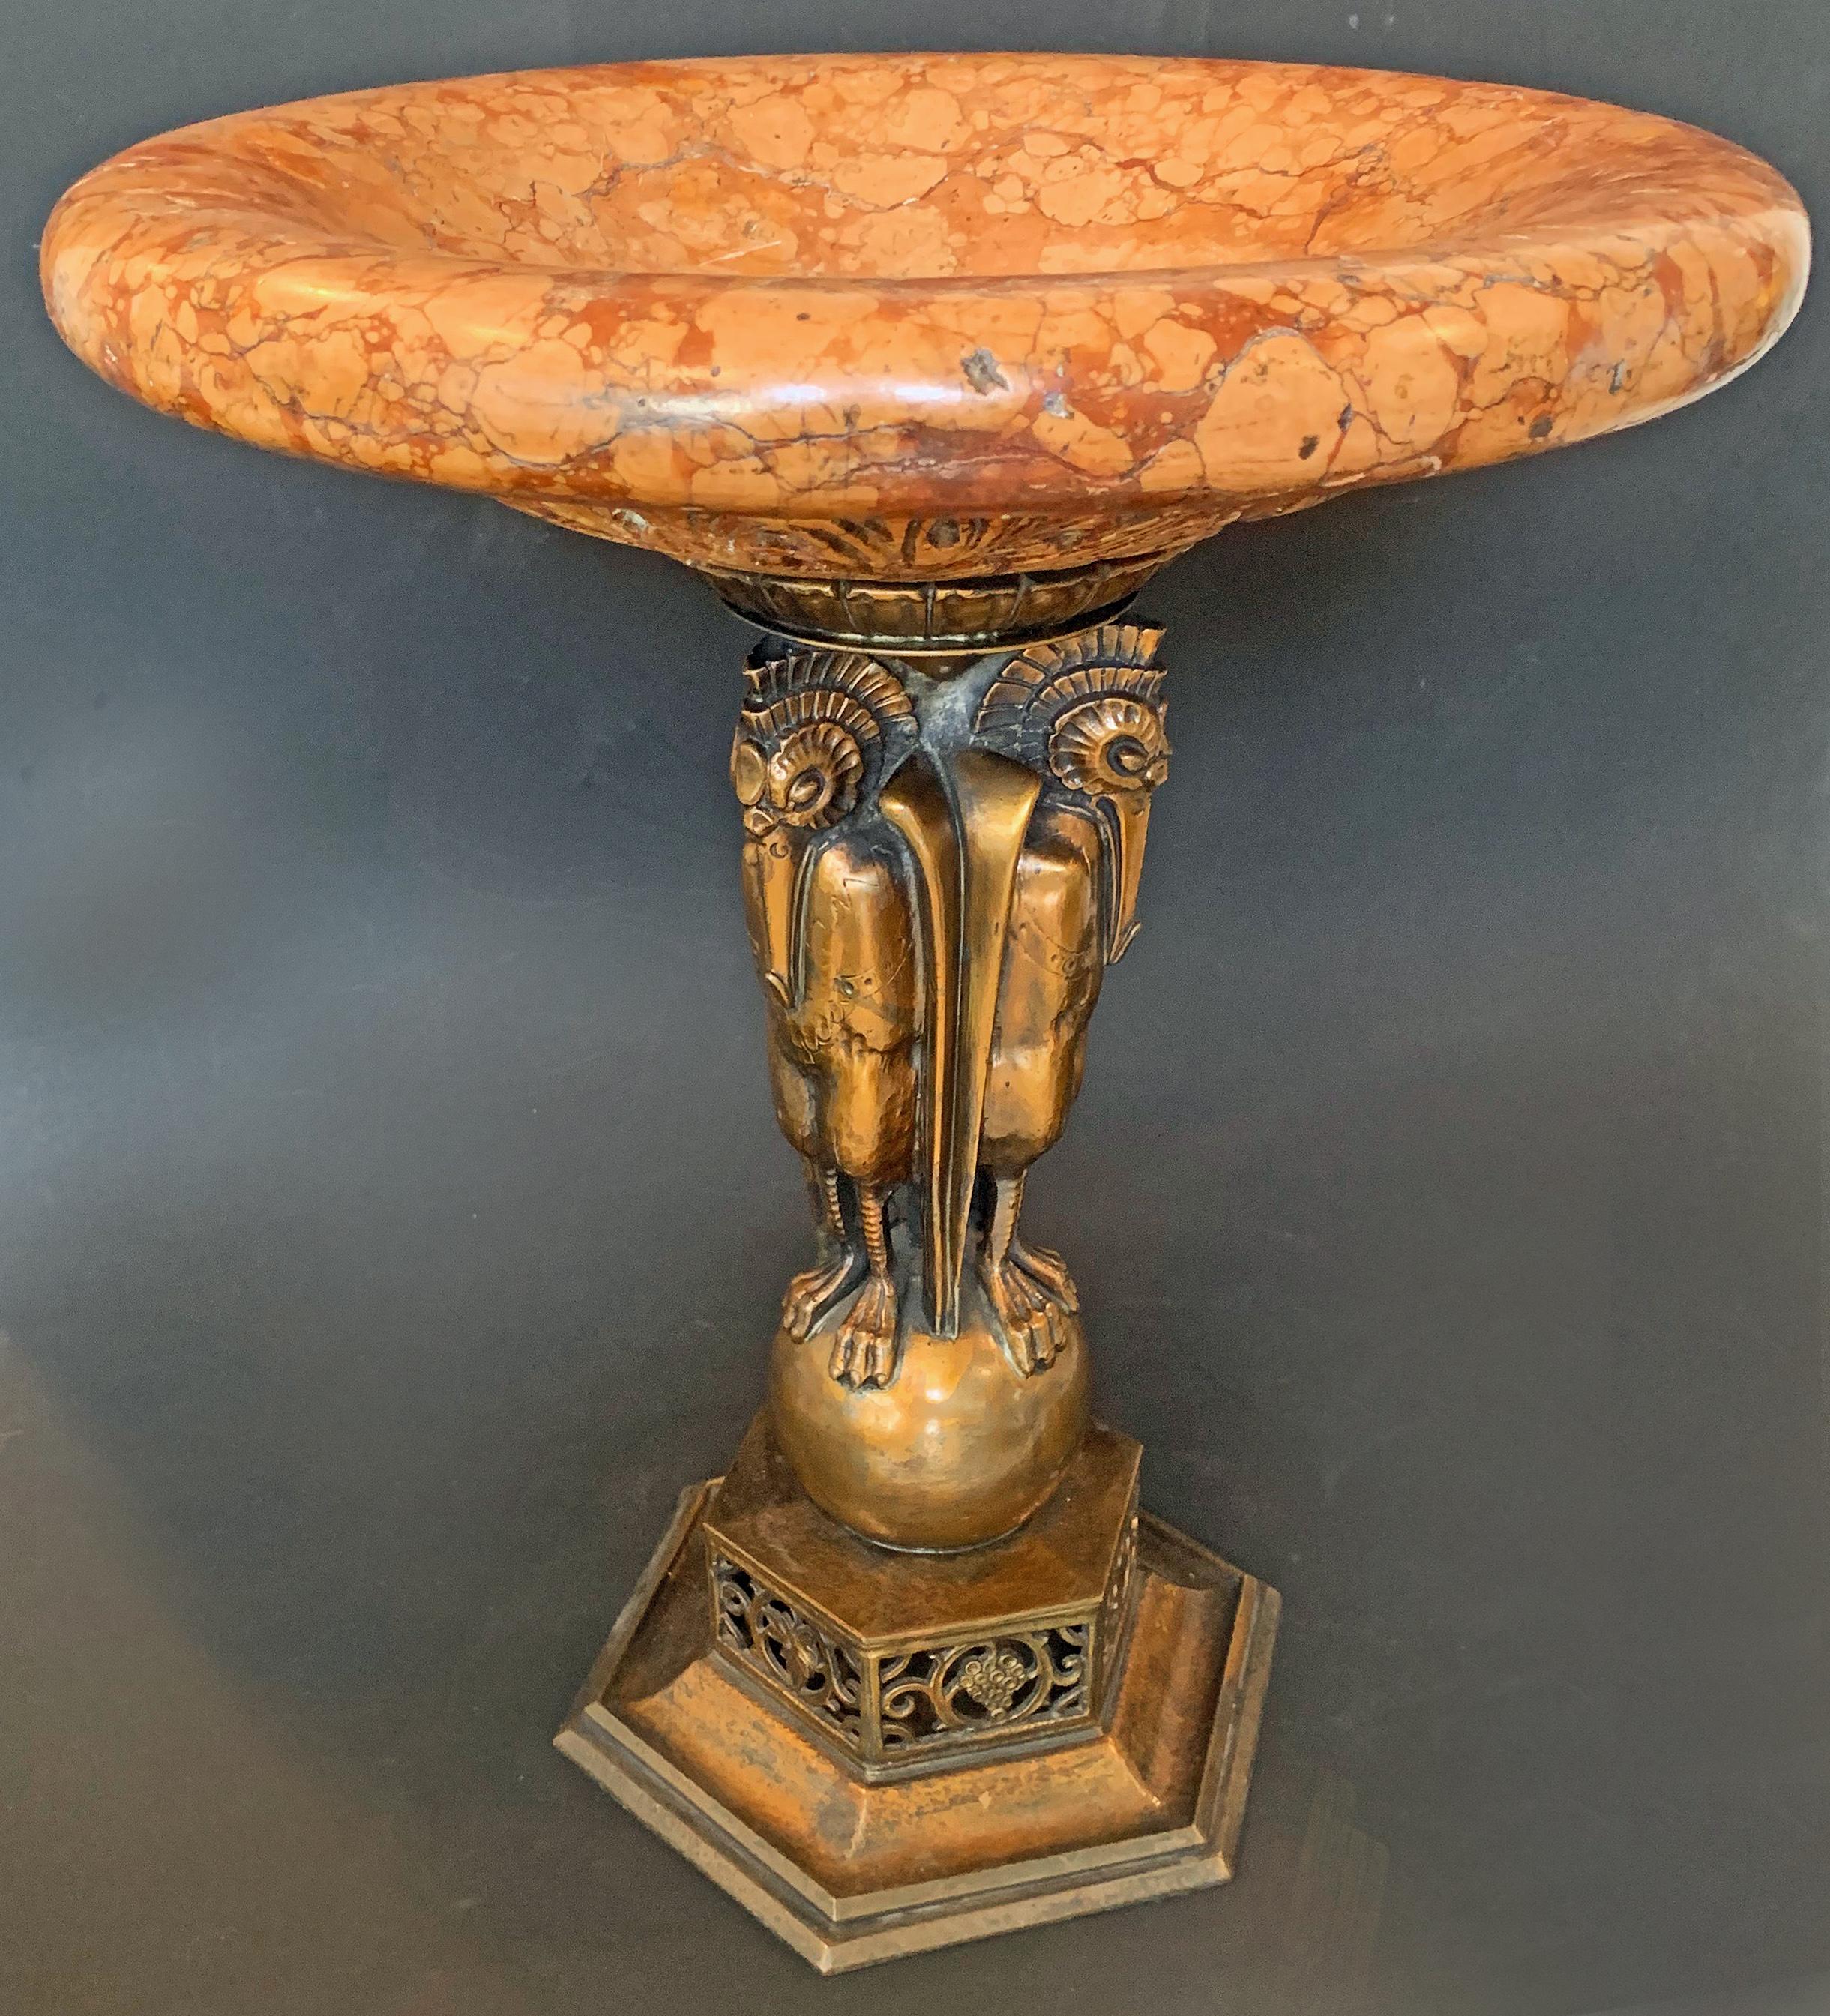 Unique and masterfully crafted, this monumental Art Deco compote features a group of stylized storks supporting a coral-hued marble bowl, carved on its underside with interlocking acanthus leaves. This piece is unique, and shows Oscar Bach's work at